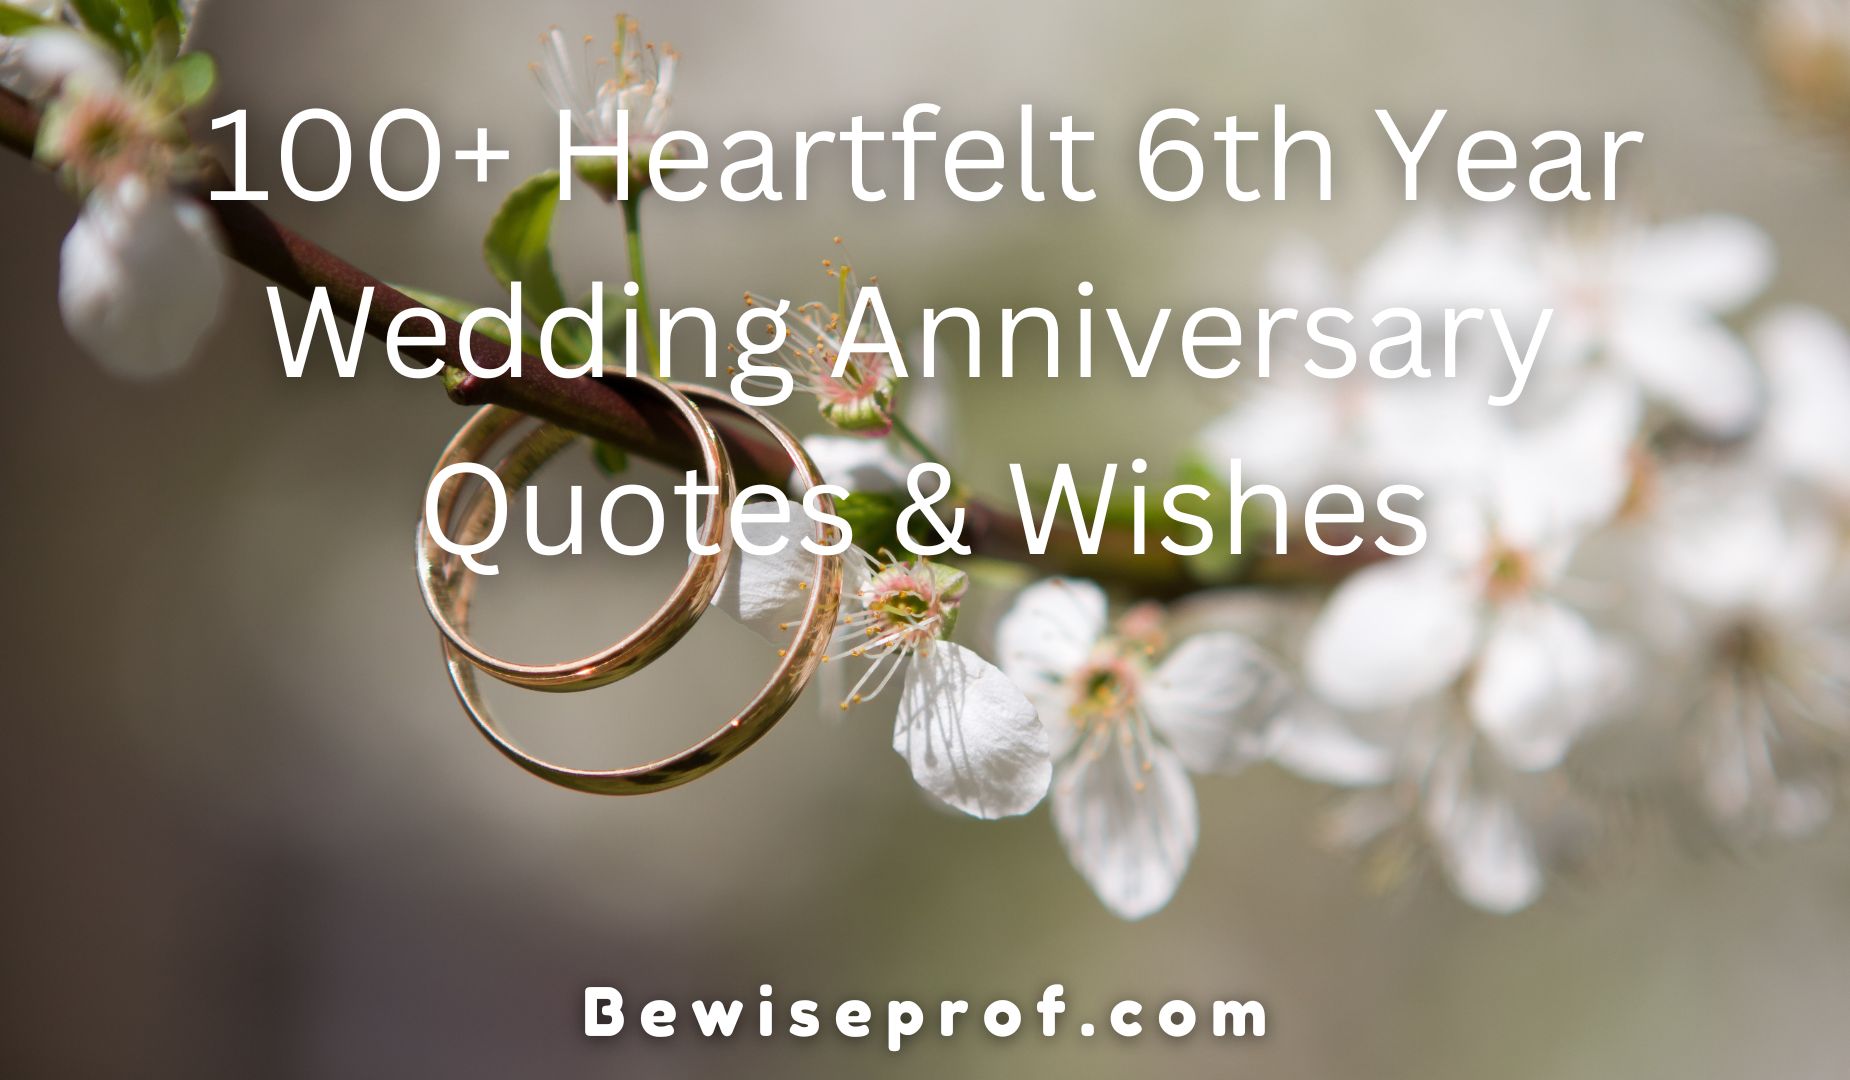 100+ Heartfelt 6th Year Wedding Anniversary Quotes And Wishes